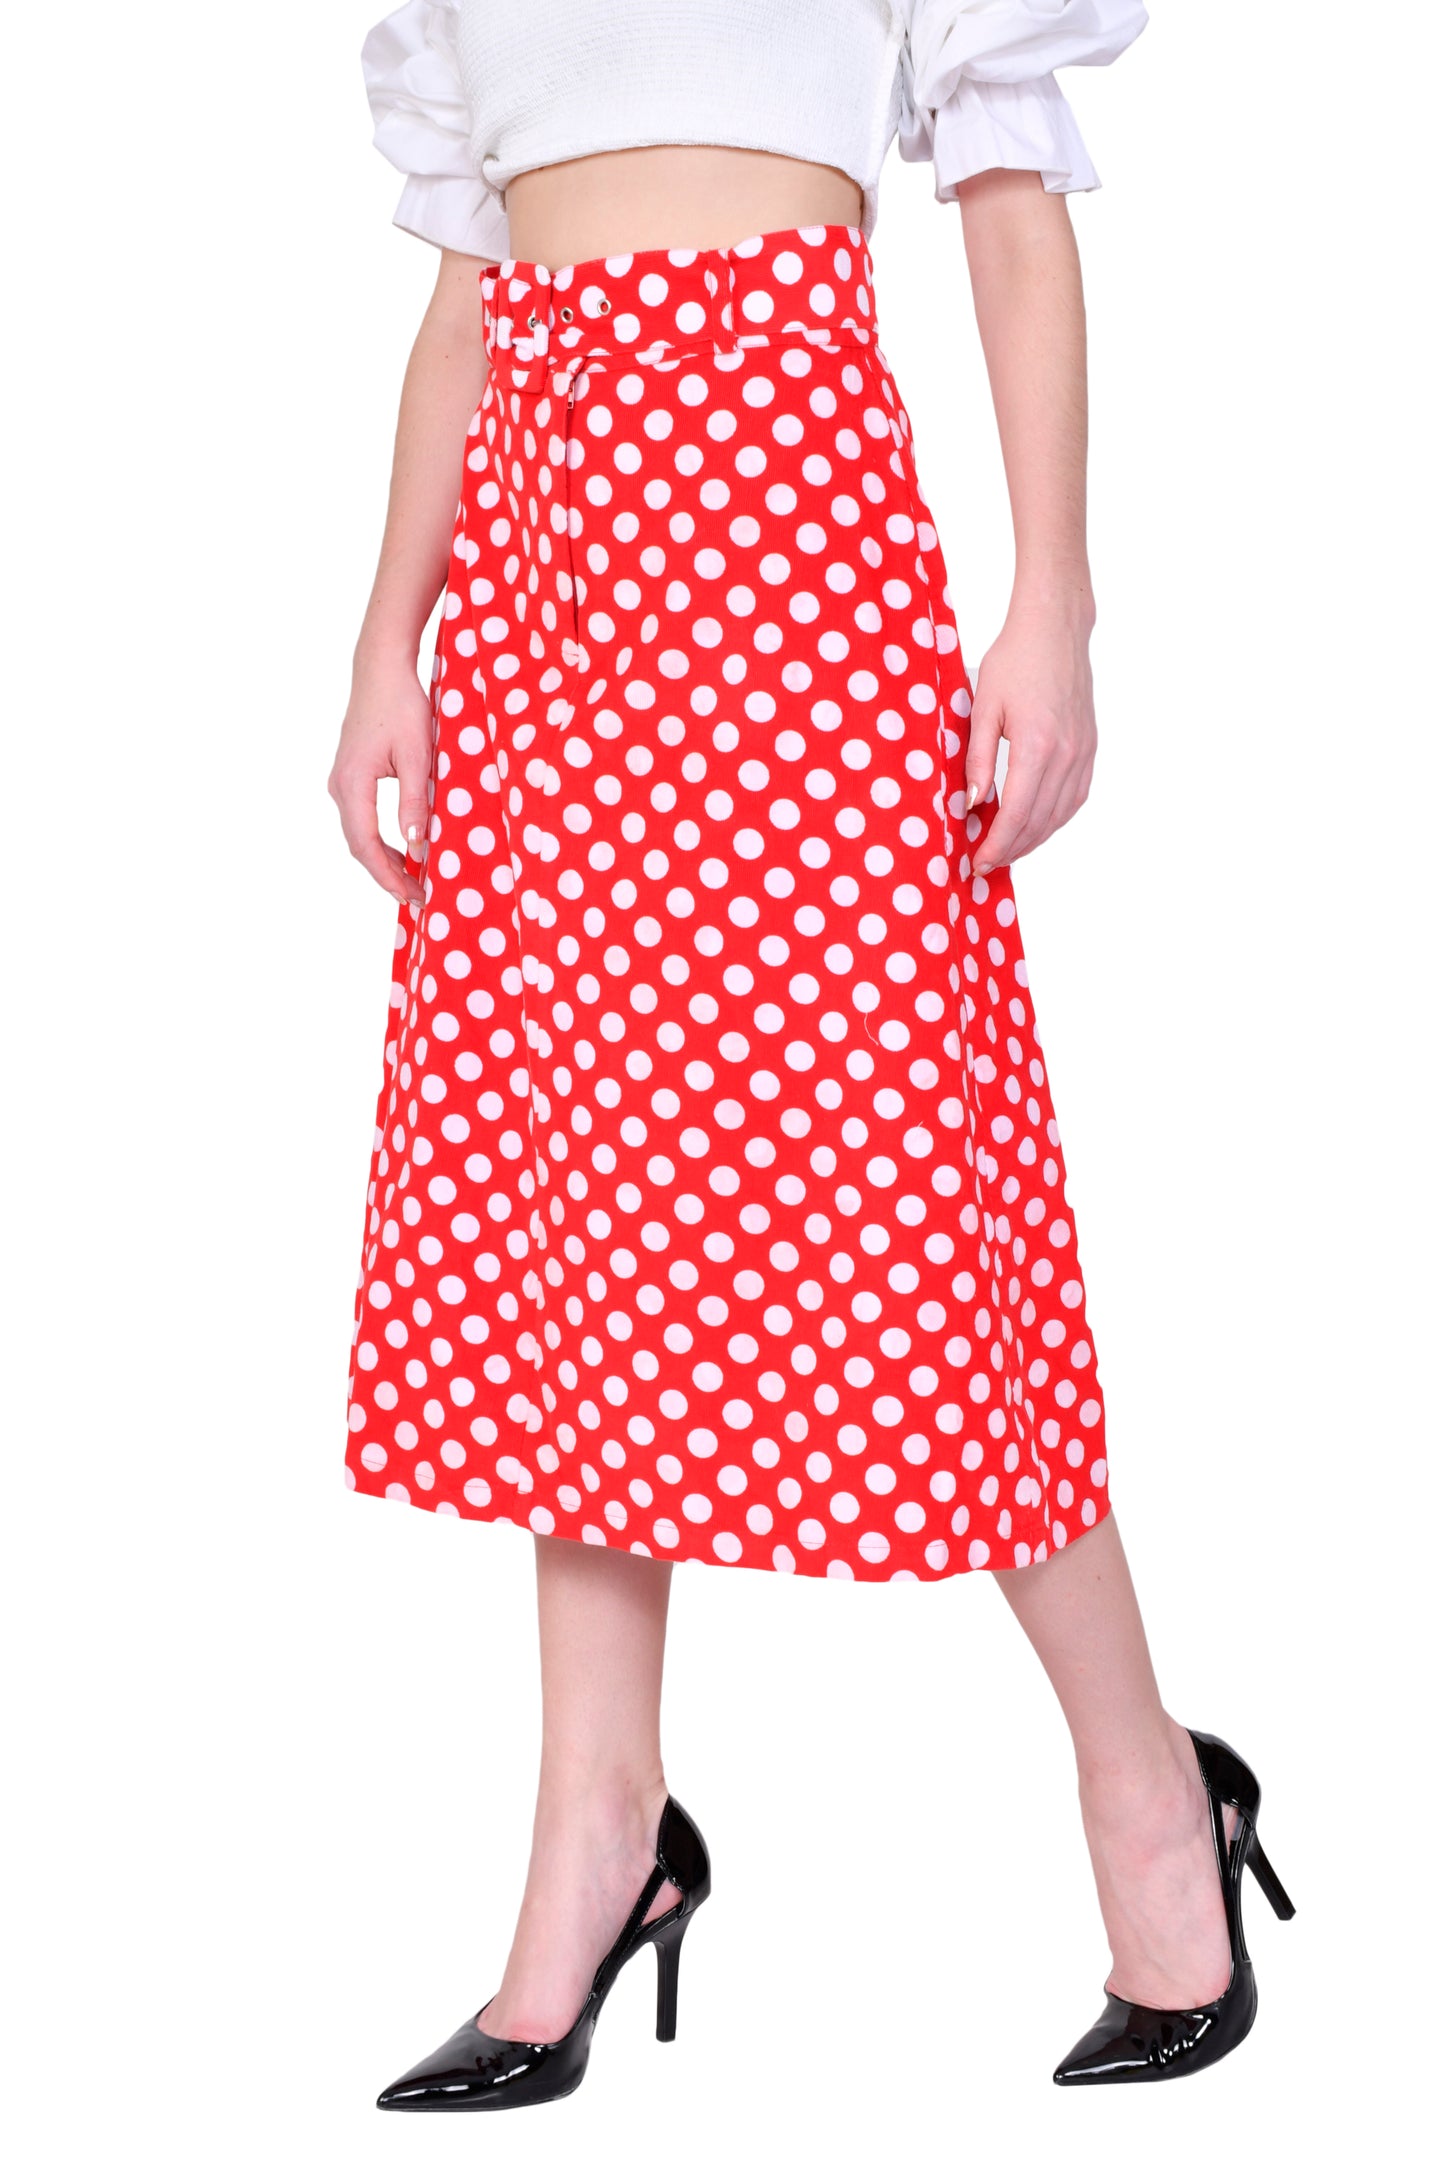 Red Polka Dotted Corduroy Skirt